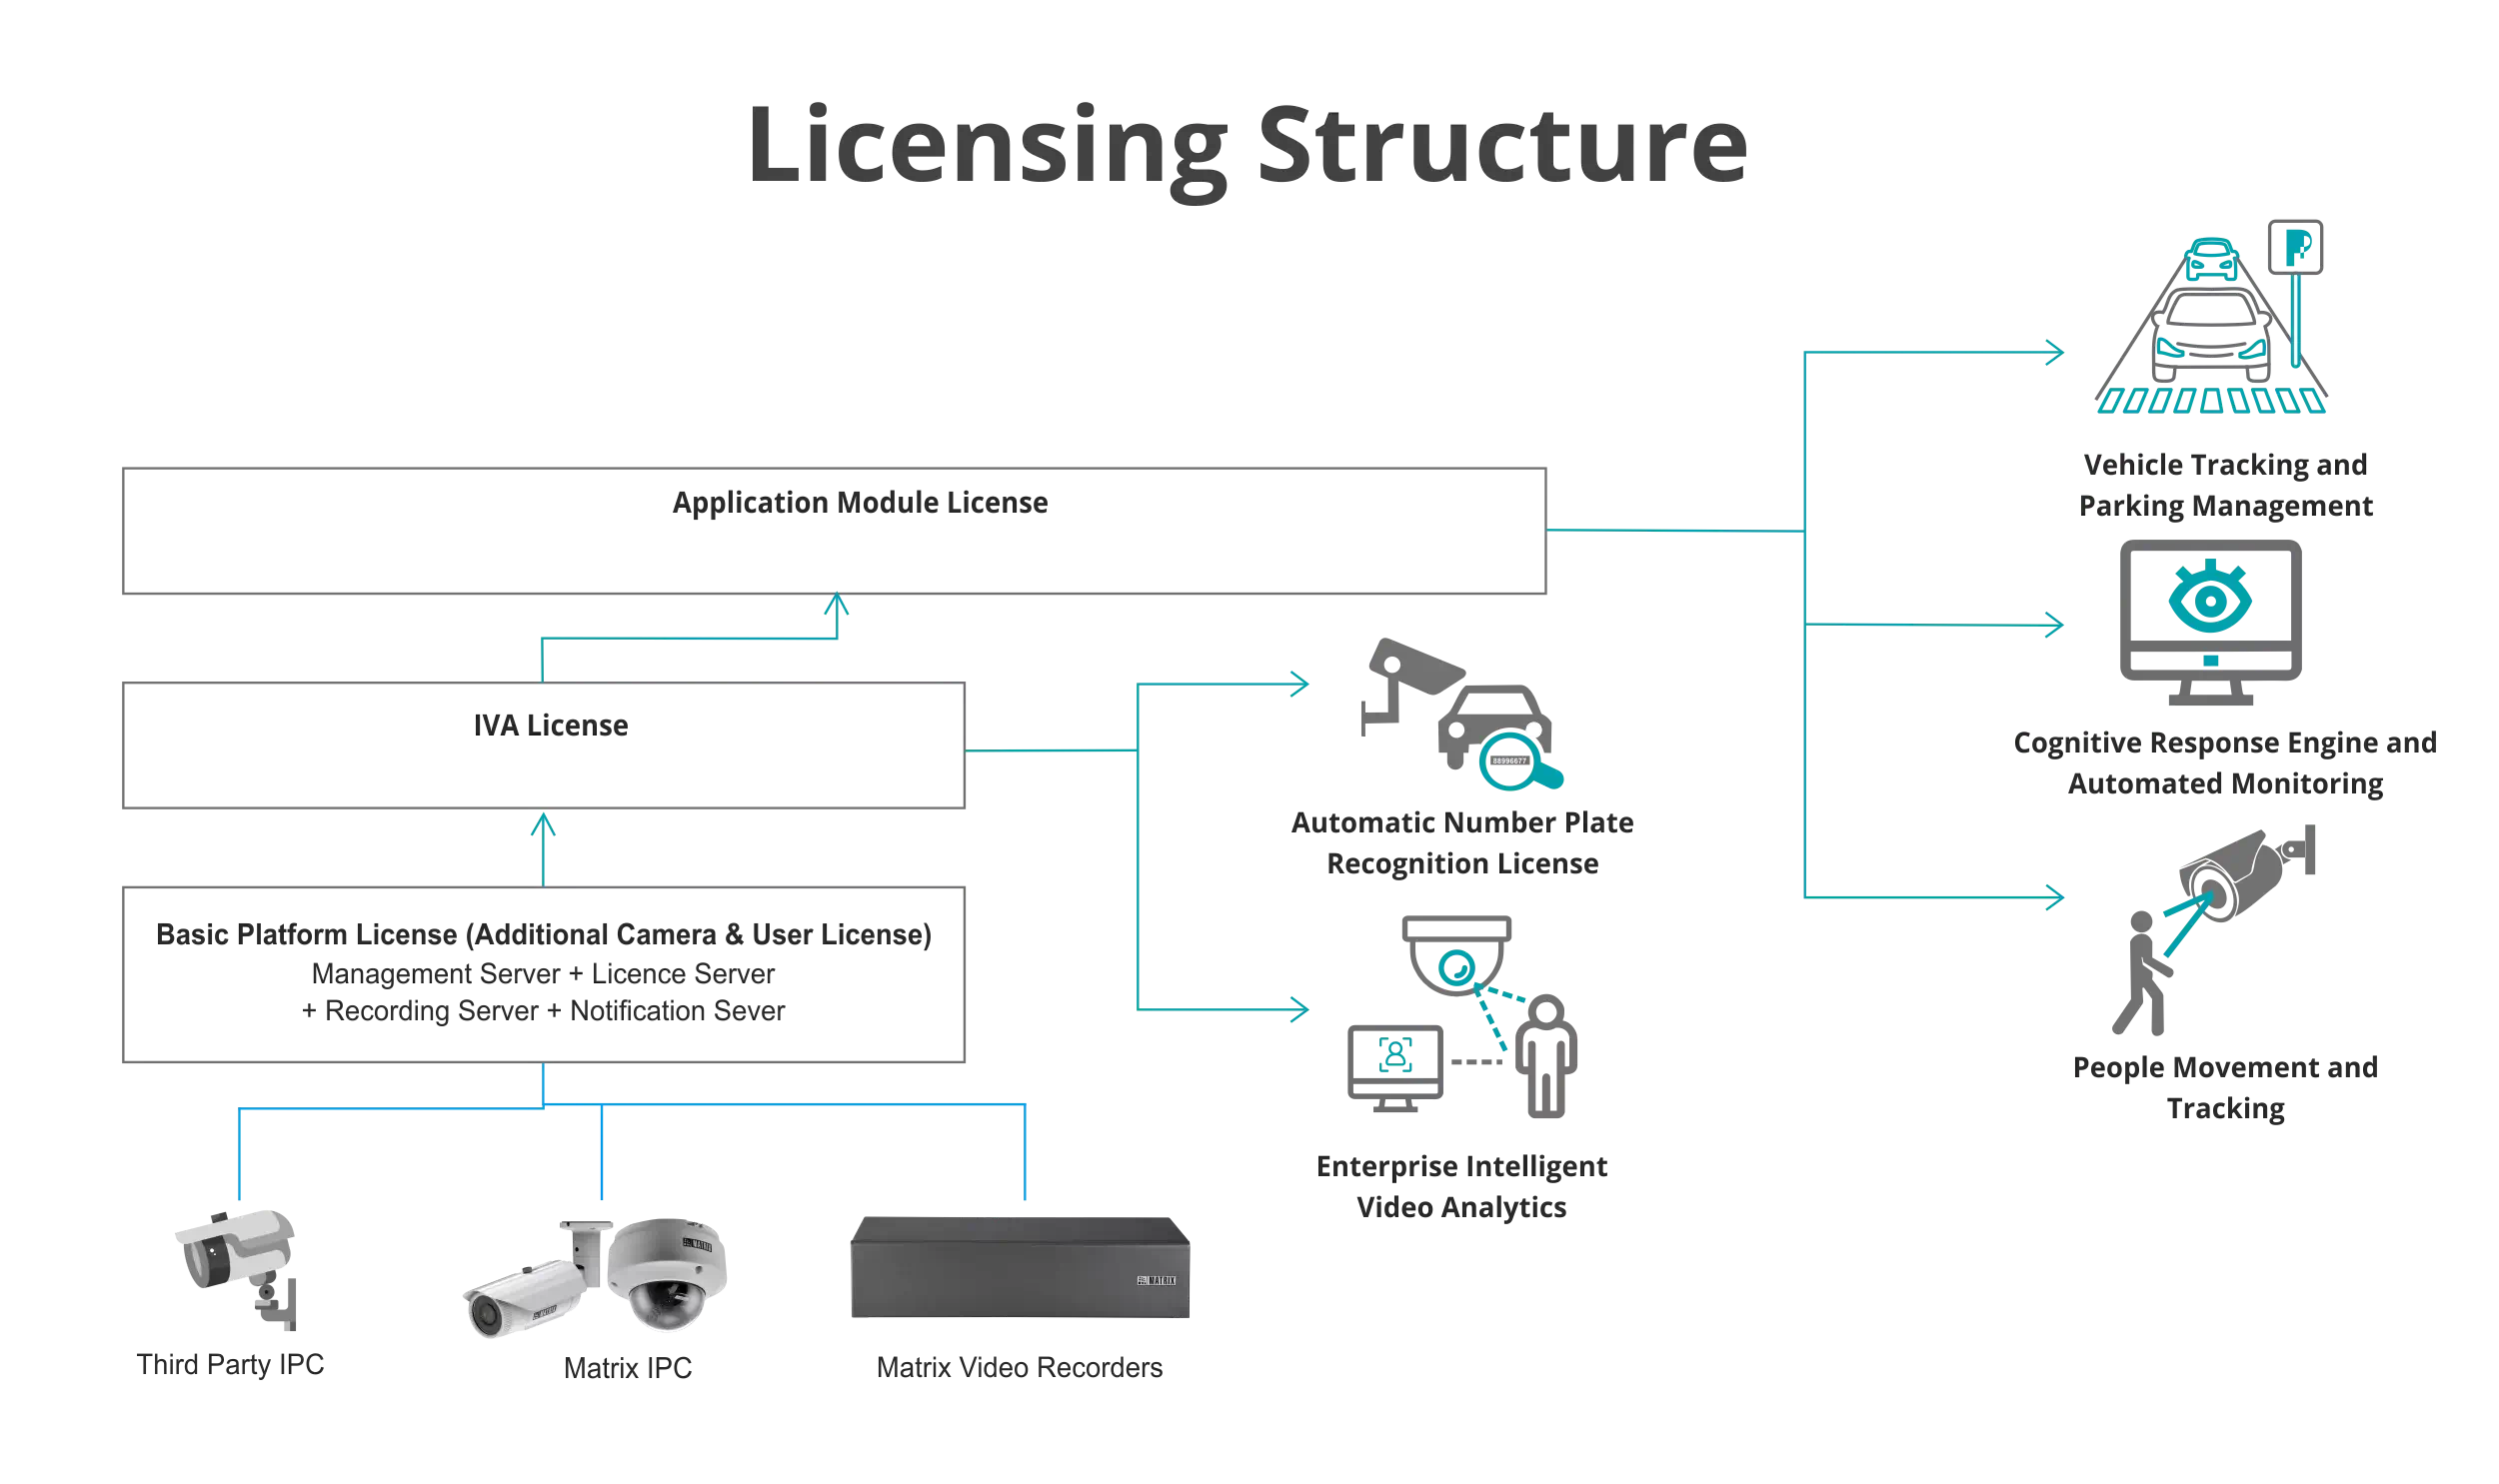 licensing-structure